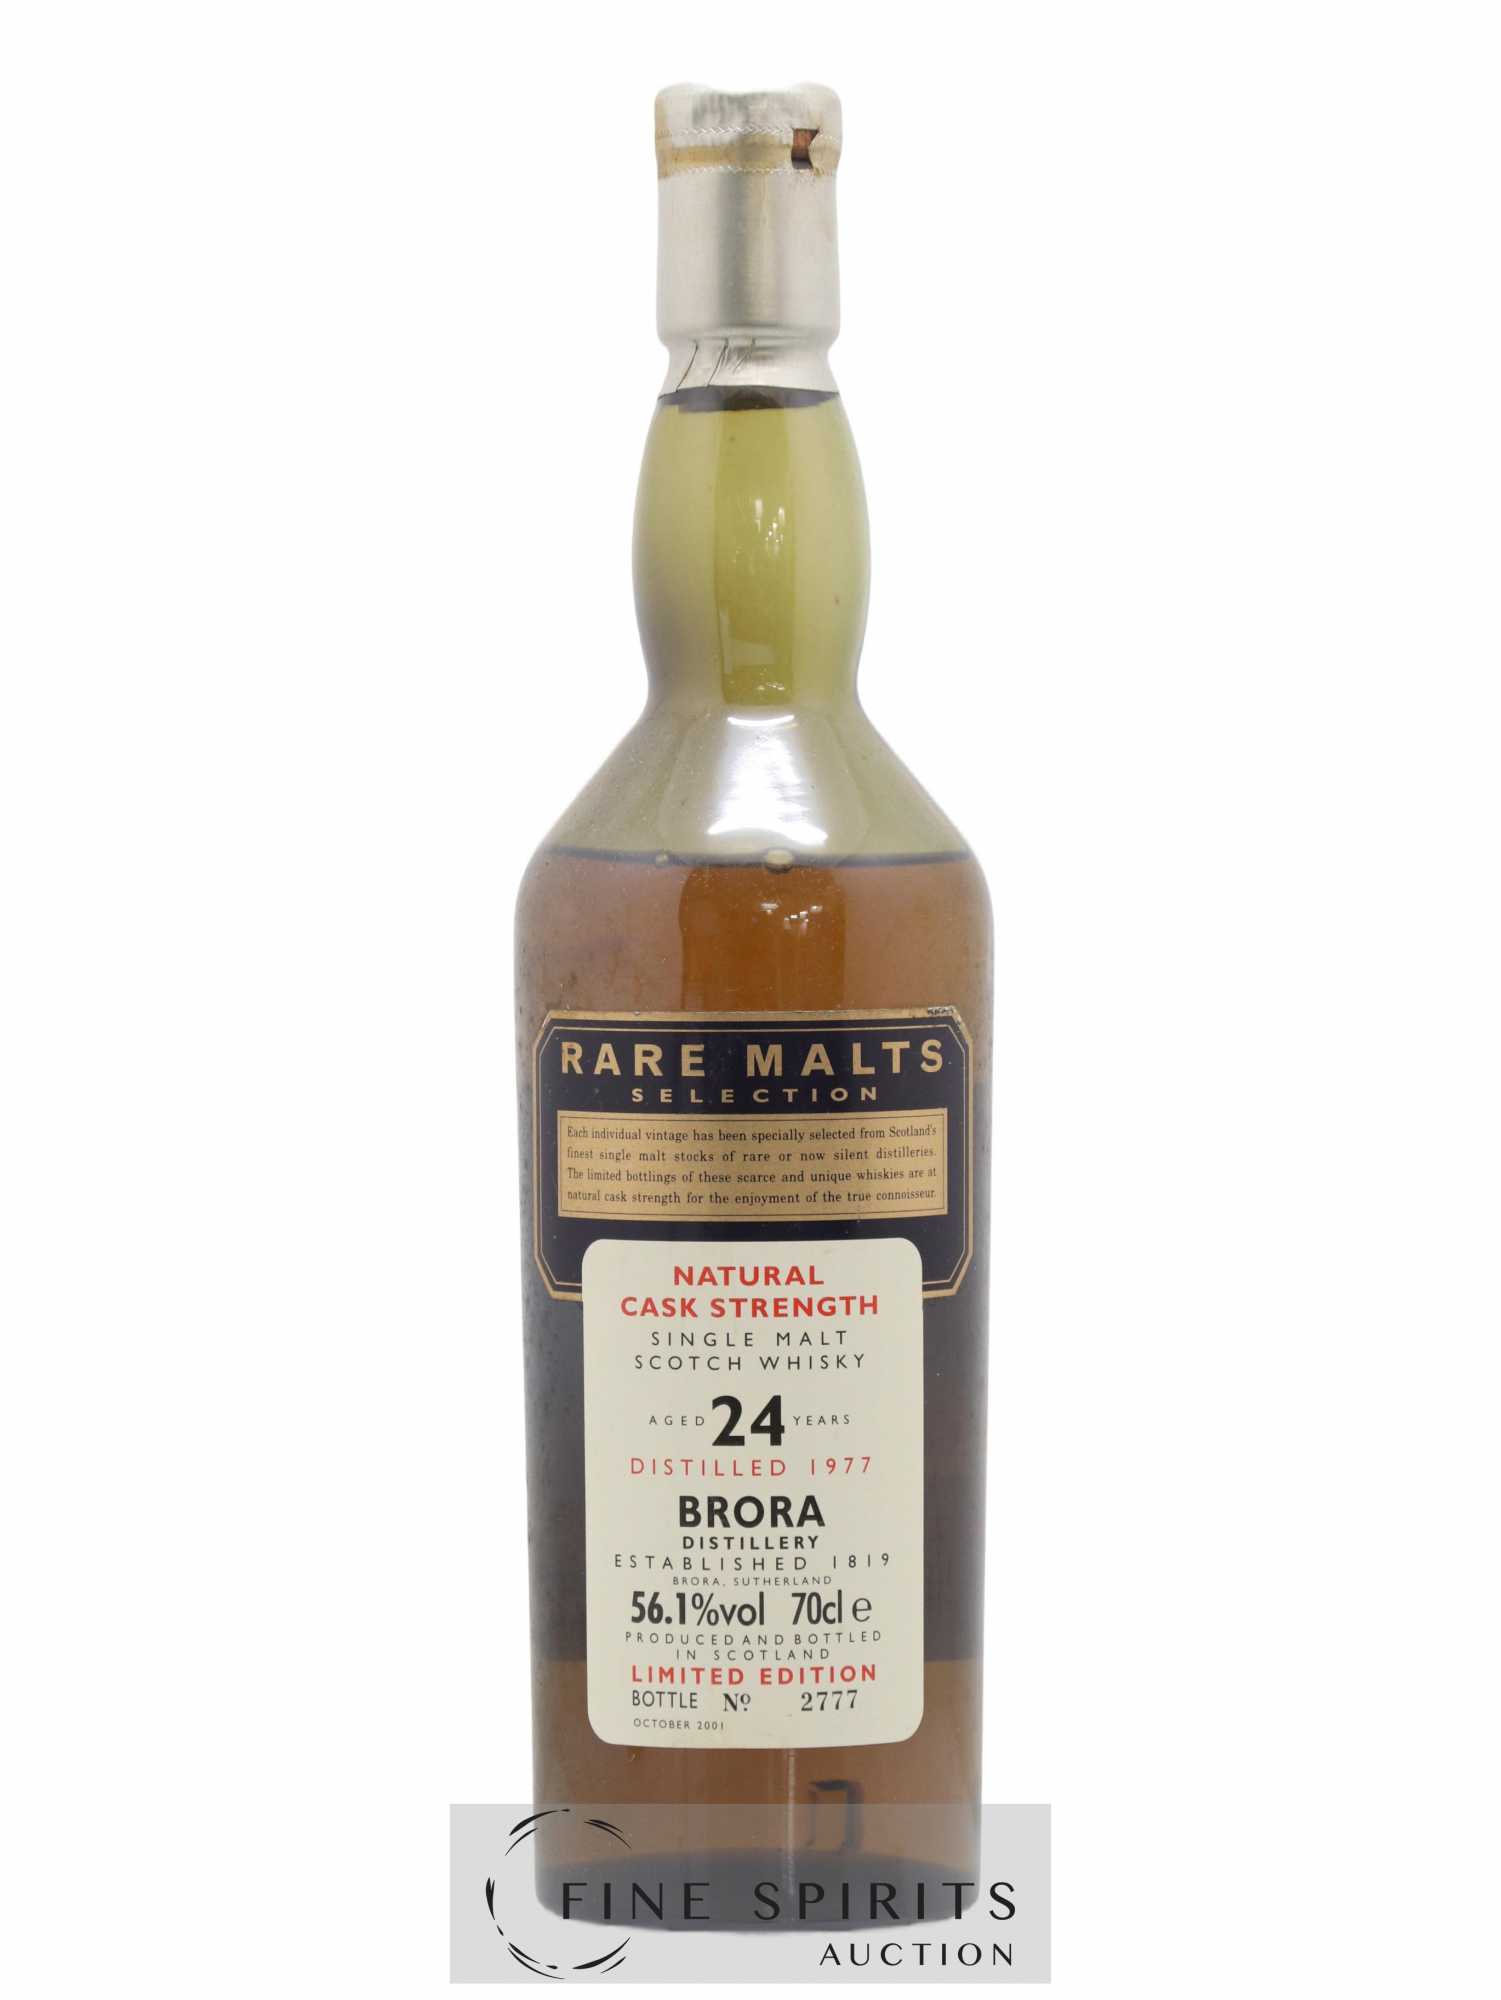 Brora 24 years 1977 Of. Rare Malts Selection Natural Cask Strengh - bottled 2001 Limited Edition 